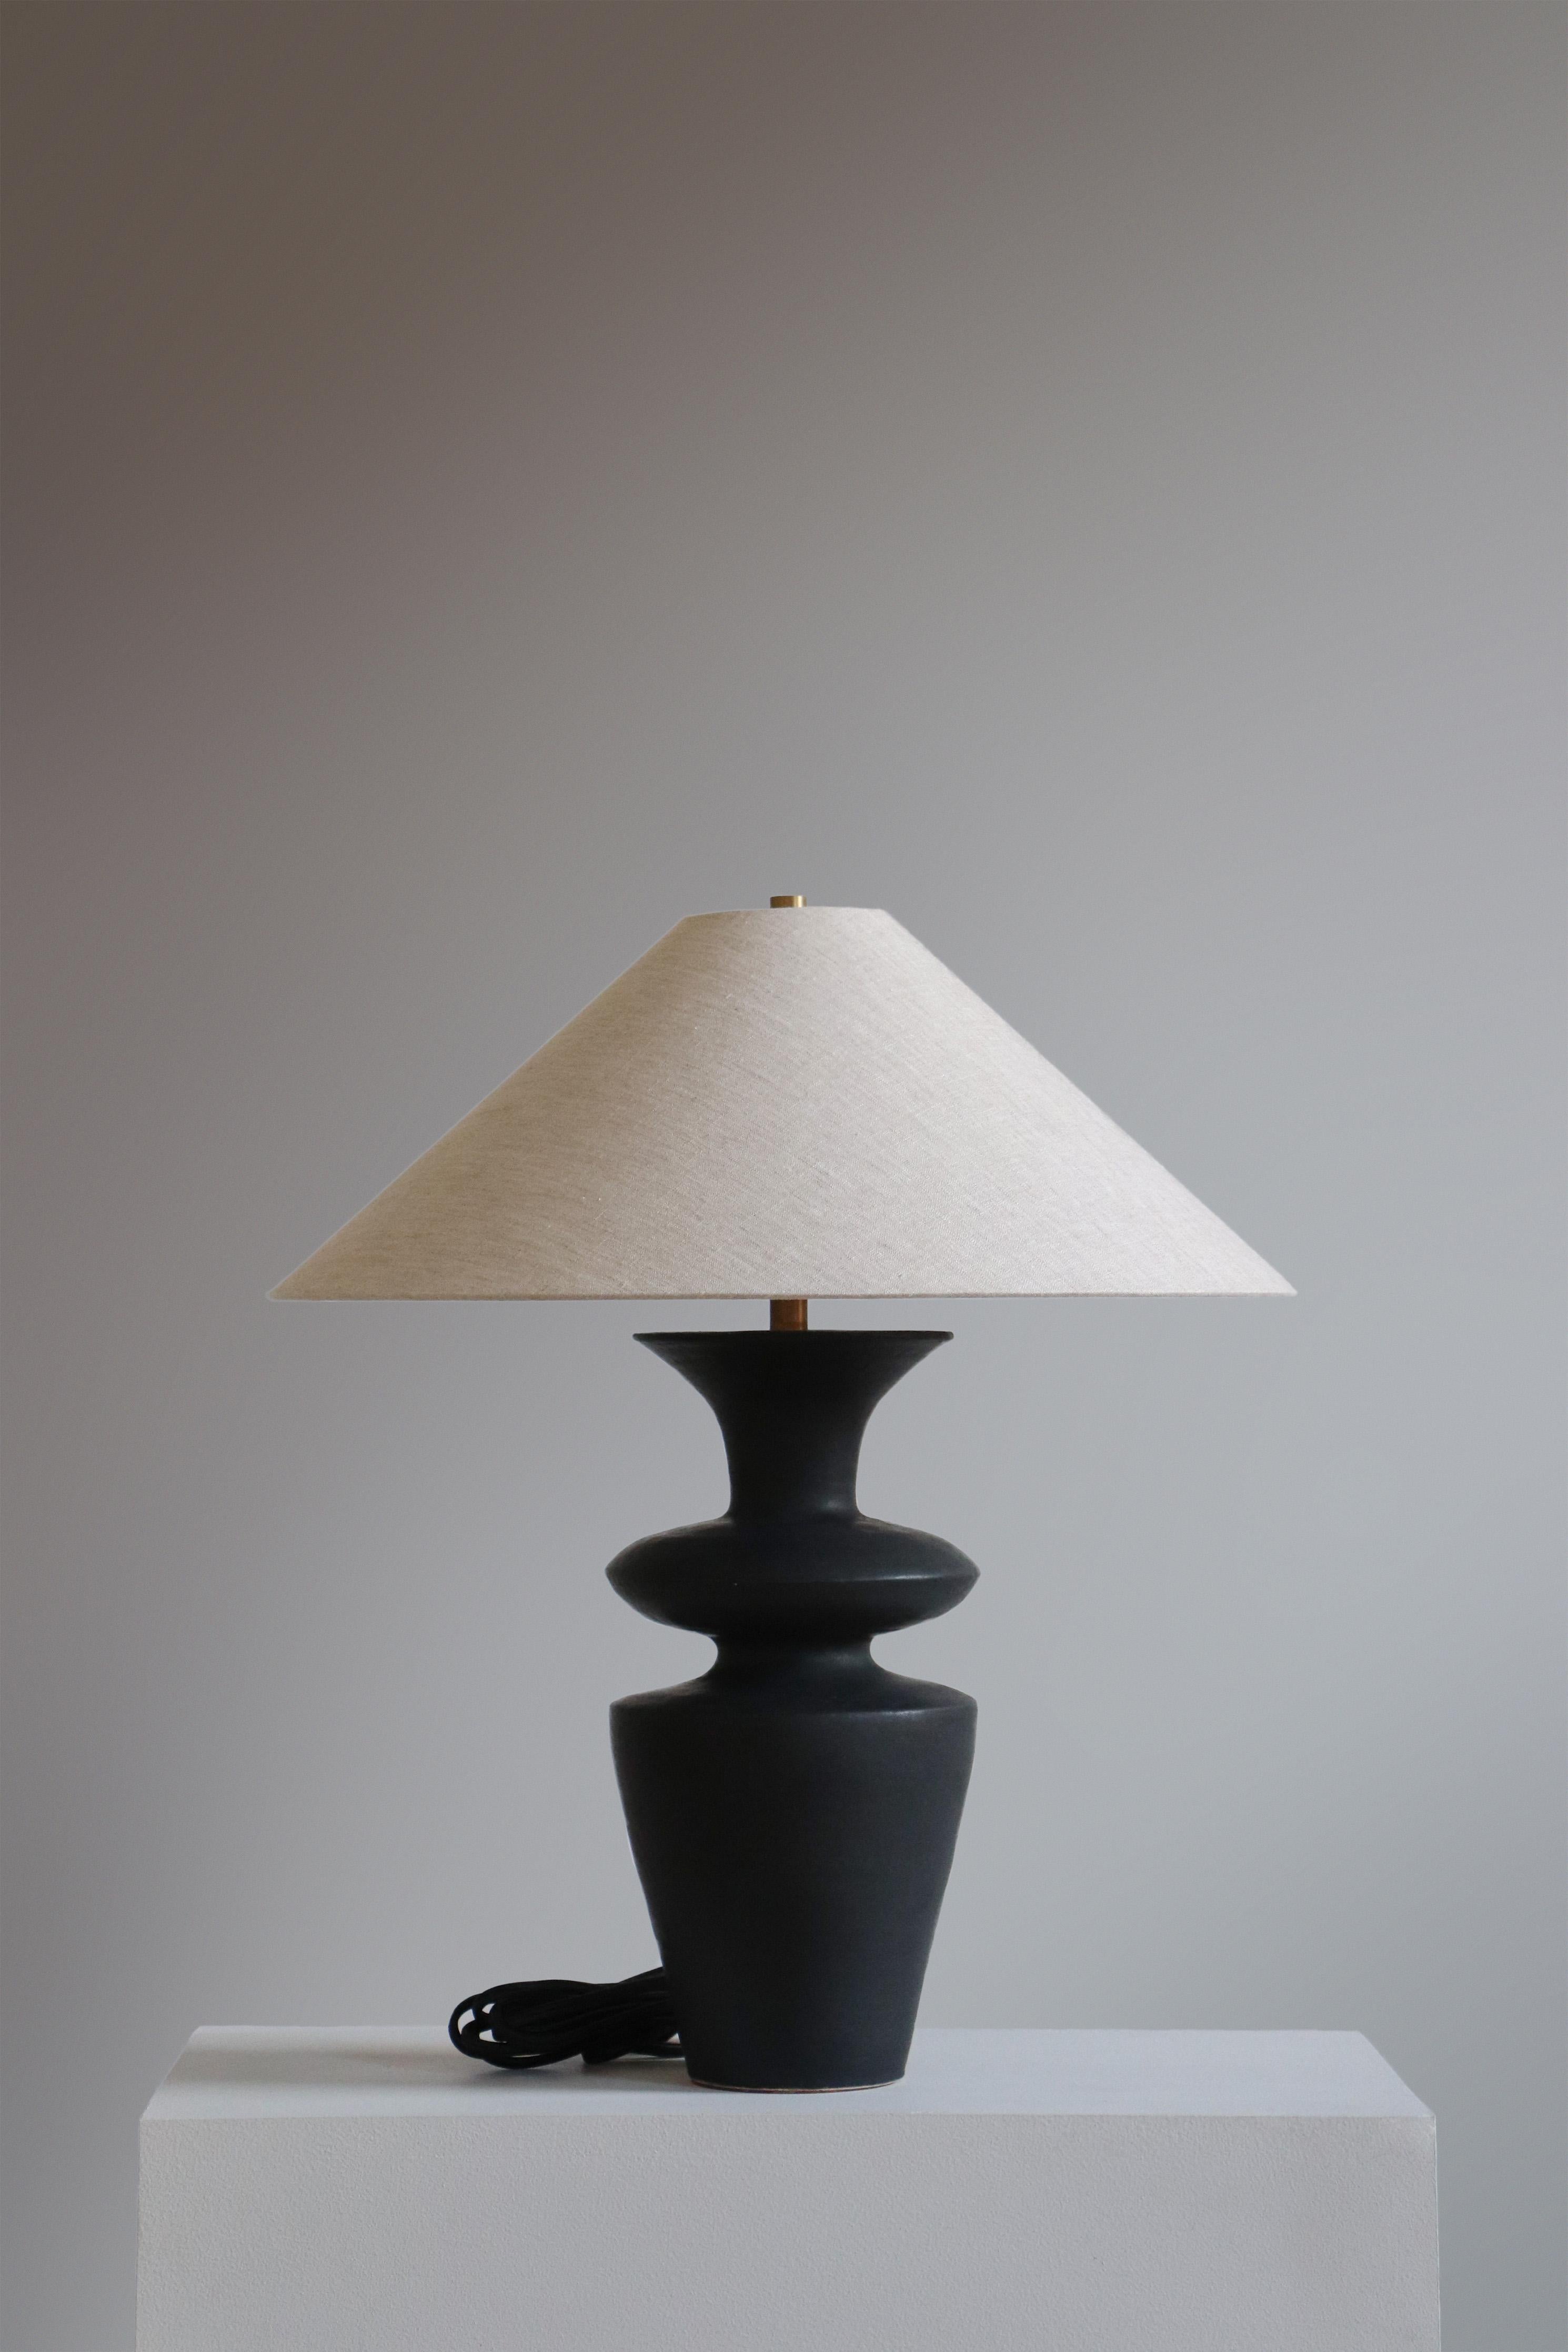 Anthracite Rhodes Table Lamp by Danny Kaplan Studio
Dimensions: ⌀ 51 x H 69 cm
Materials: Glazed Ceramic, Unfinished Brass, Linen

This item is handmade, and may exhibit variability within the same piece. We do our best to maintain a consistent